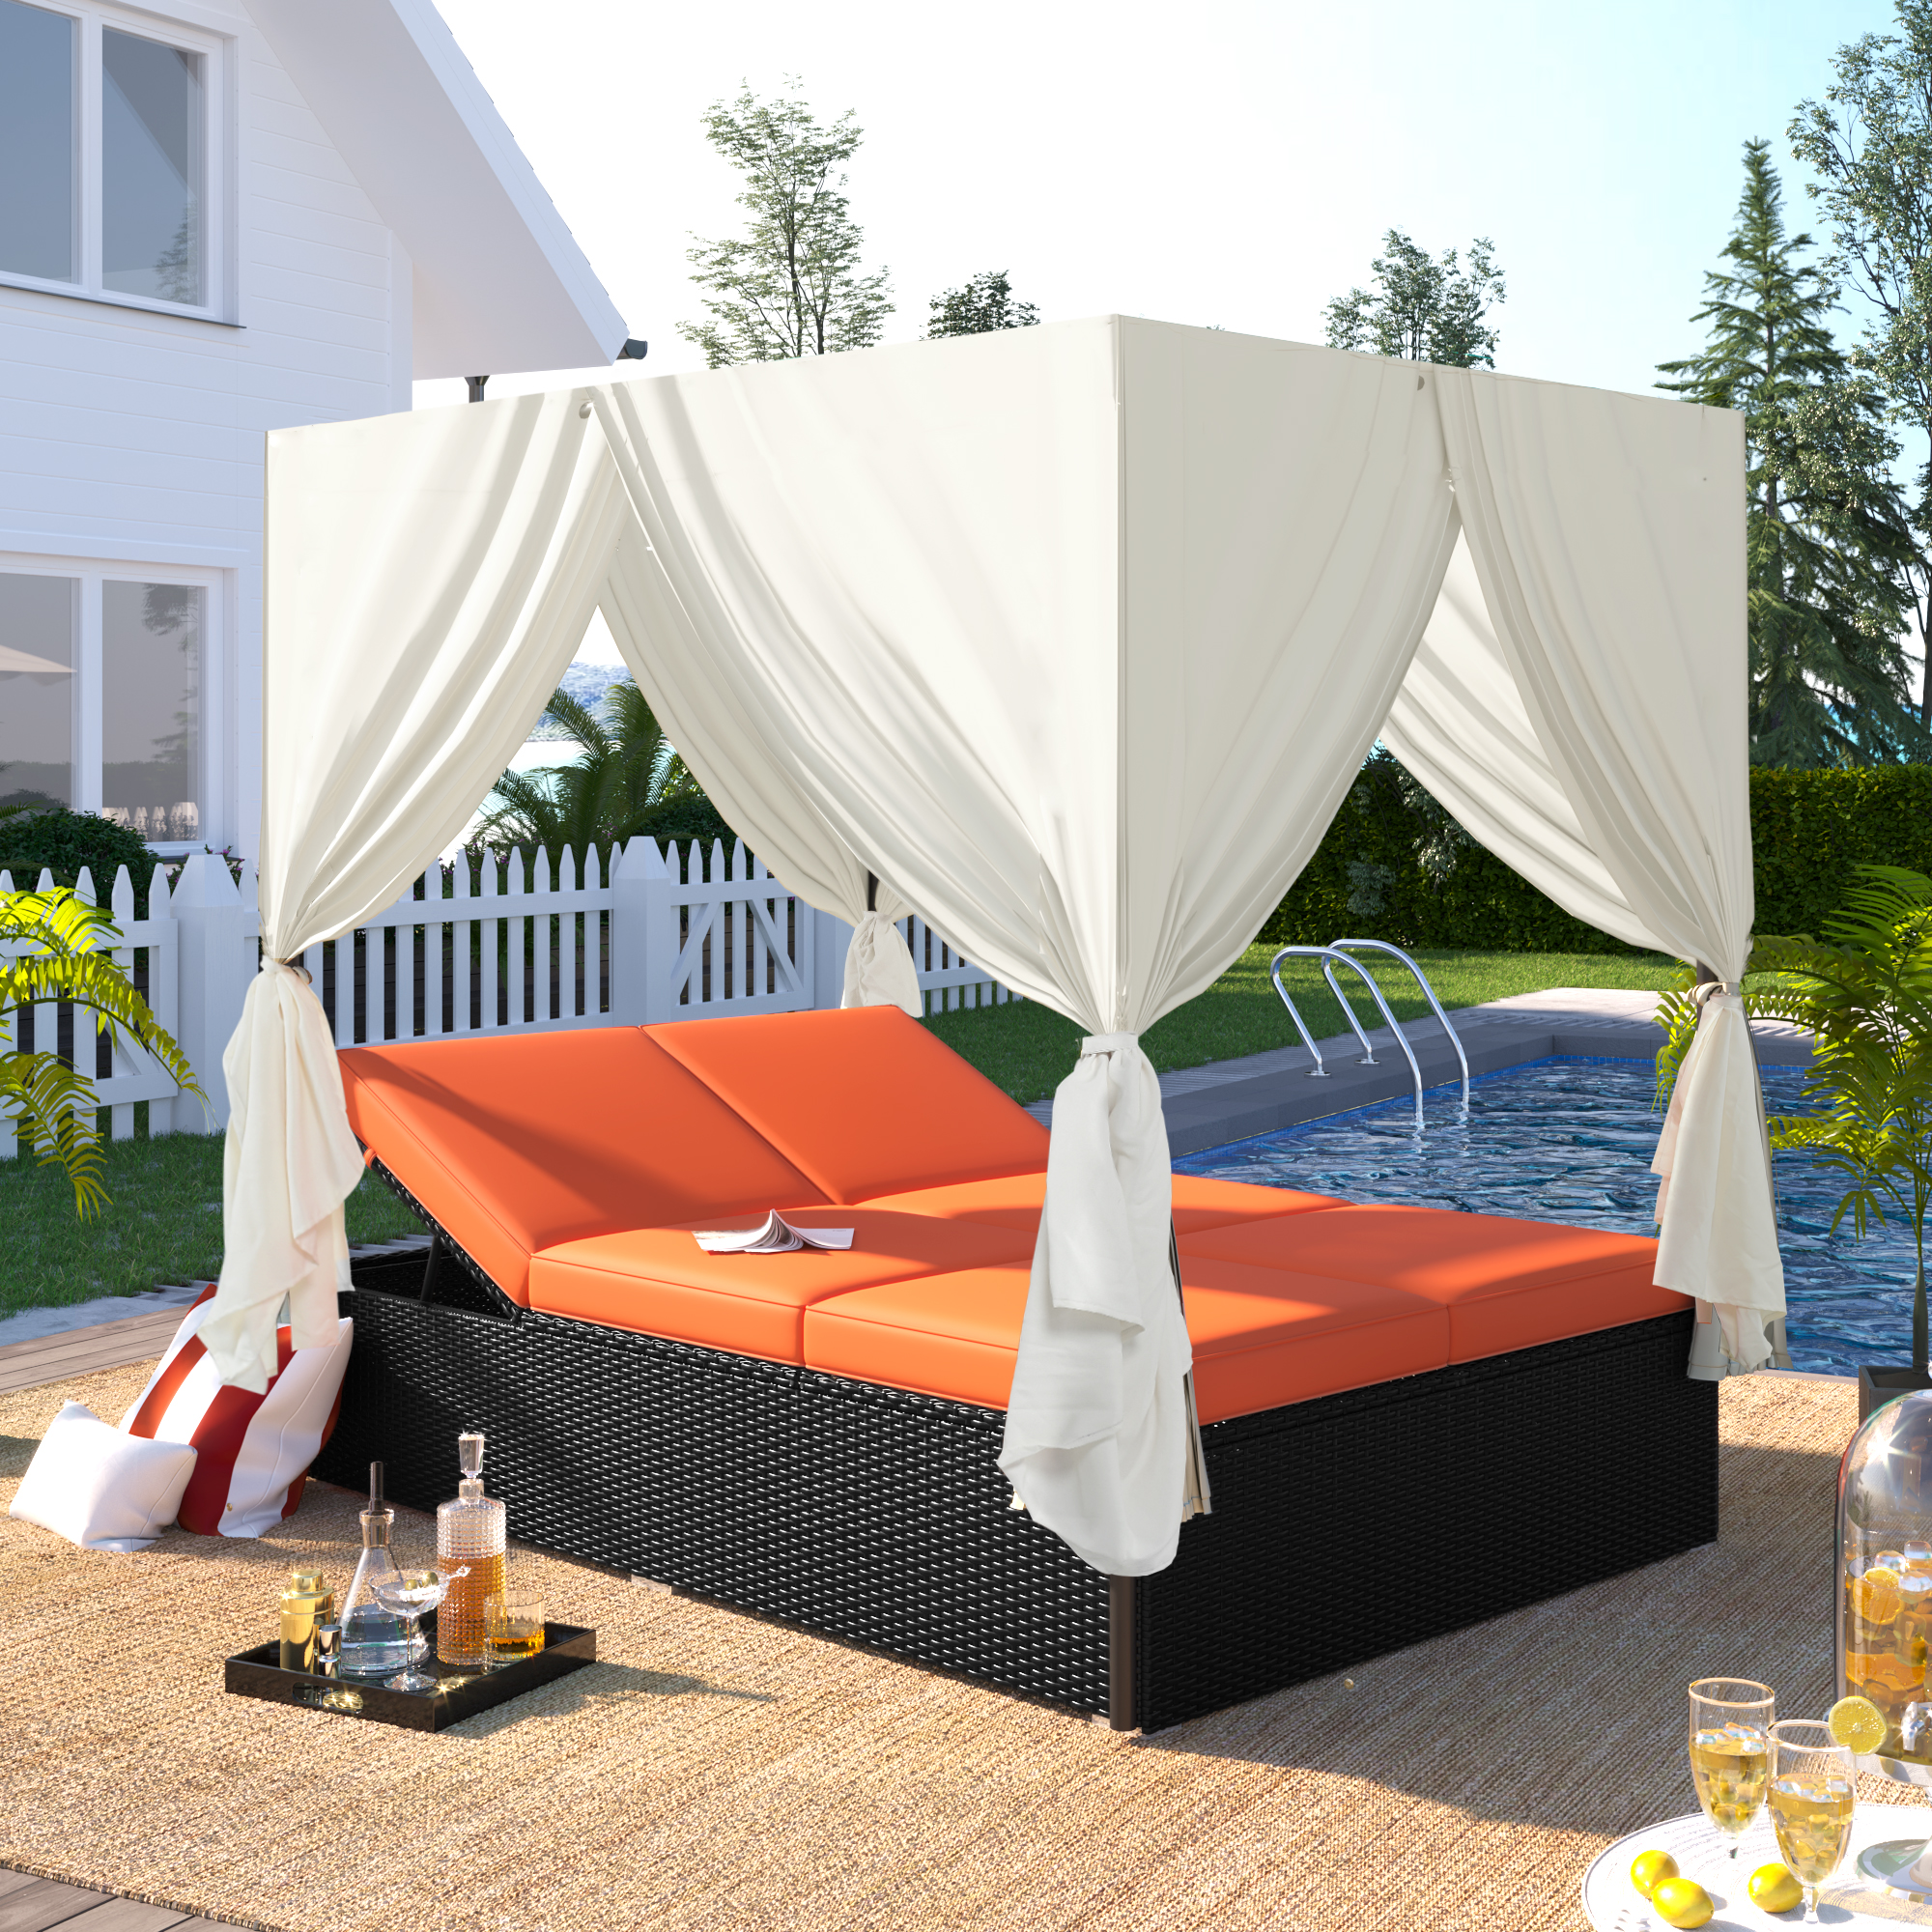 Patio Daybed, Outdoor Wicker Furniture Set with Four-Sided Canopy and Overhead Curtains, Outdoor Sofa Set w/Adjustable Seat for Patio Deck Poolside Garden Backyard - image 1 of 10